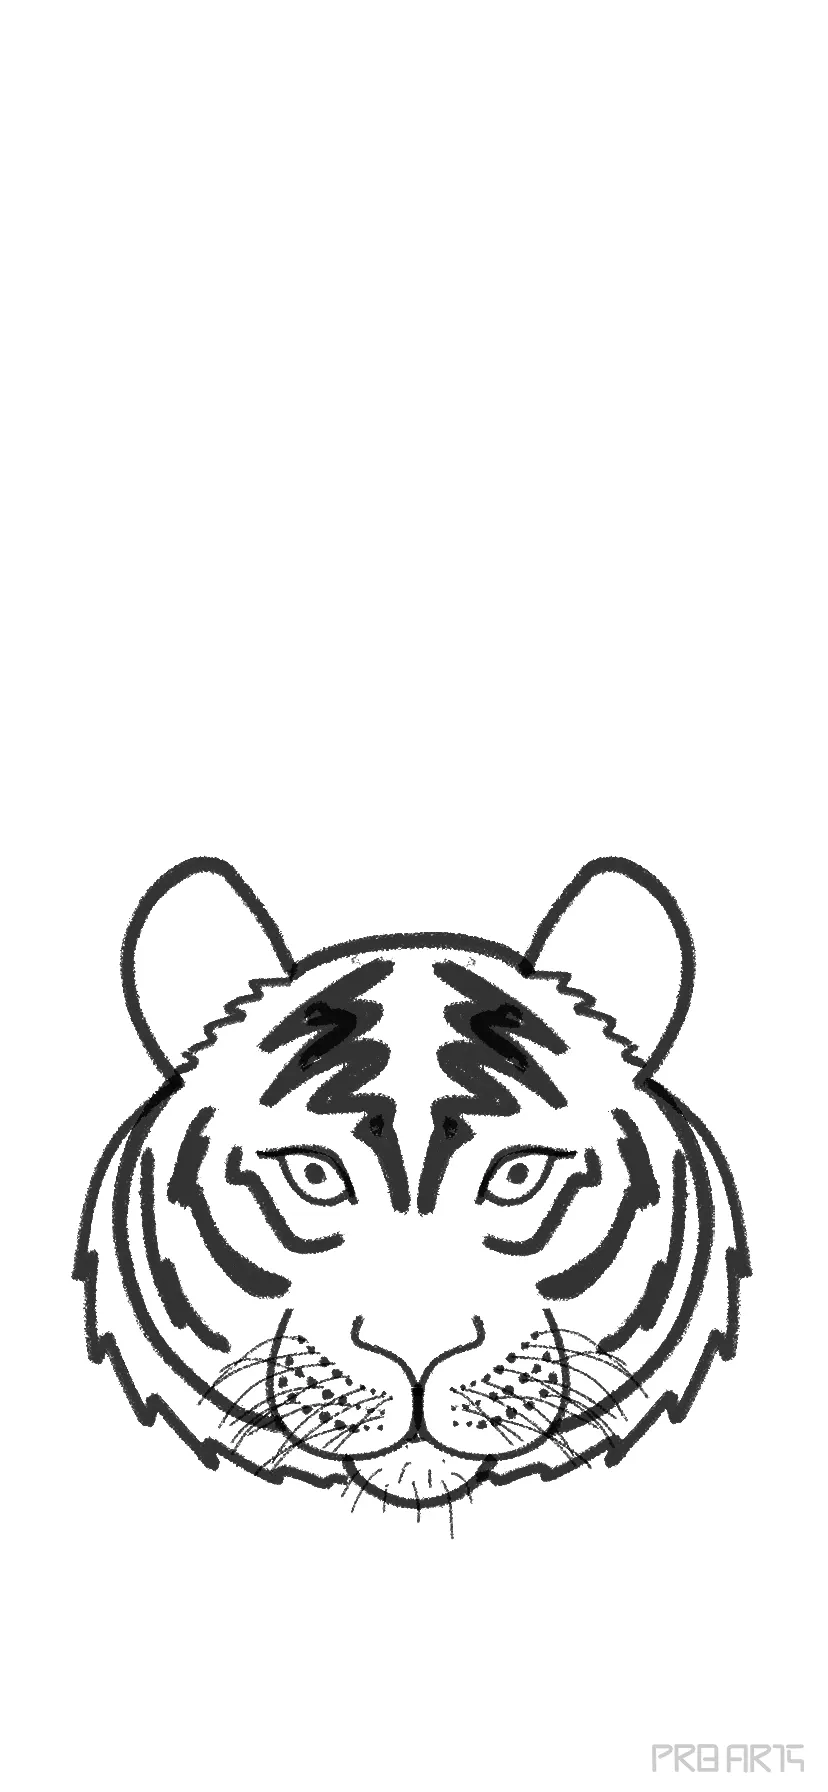 Angry saber tiger drawing saber-toothed Royalty Free Vector